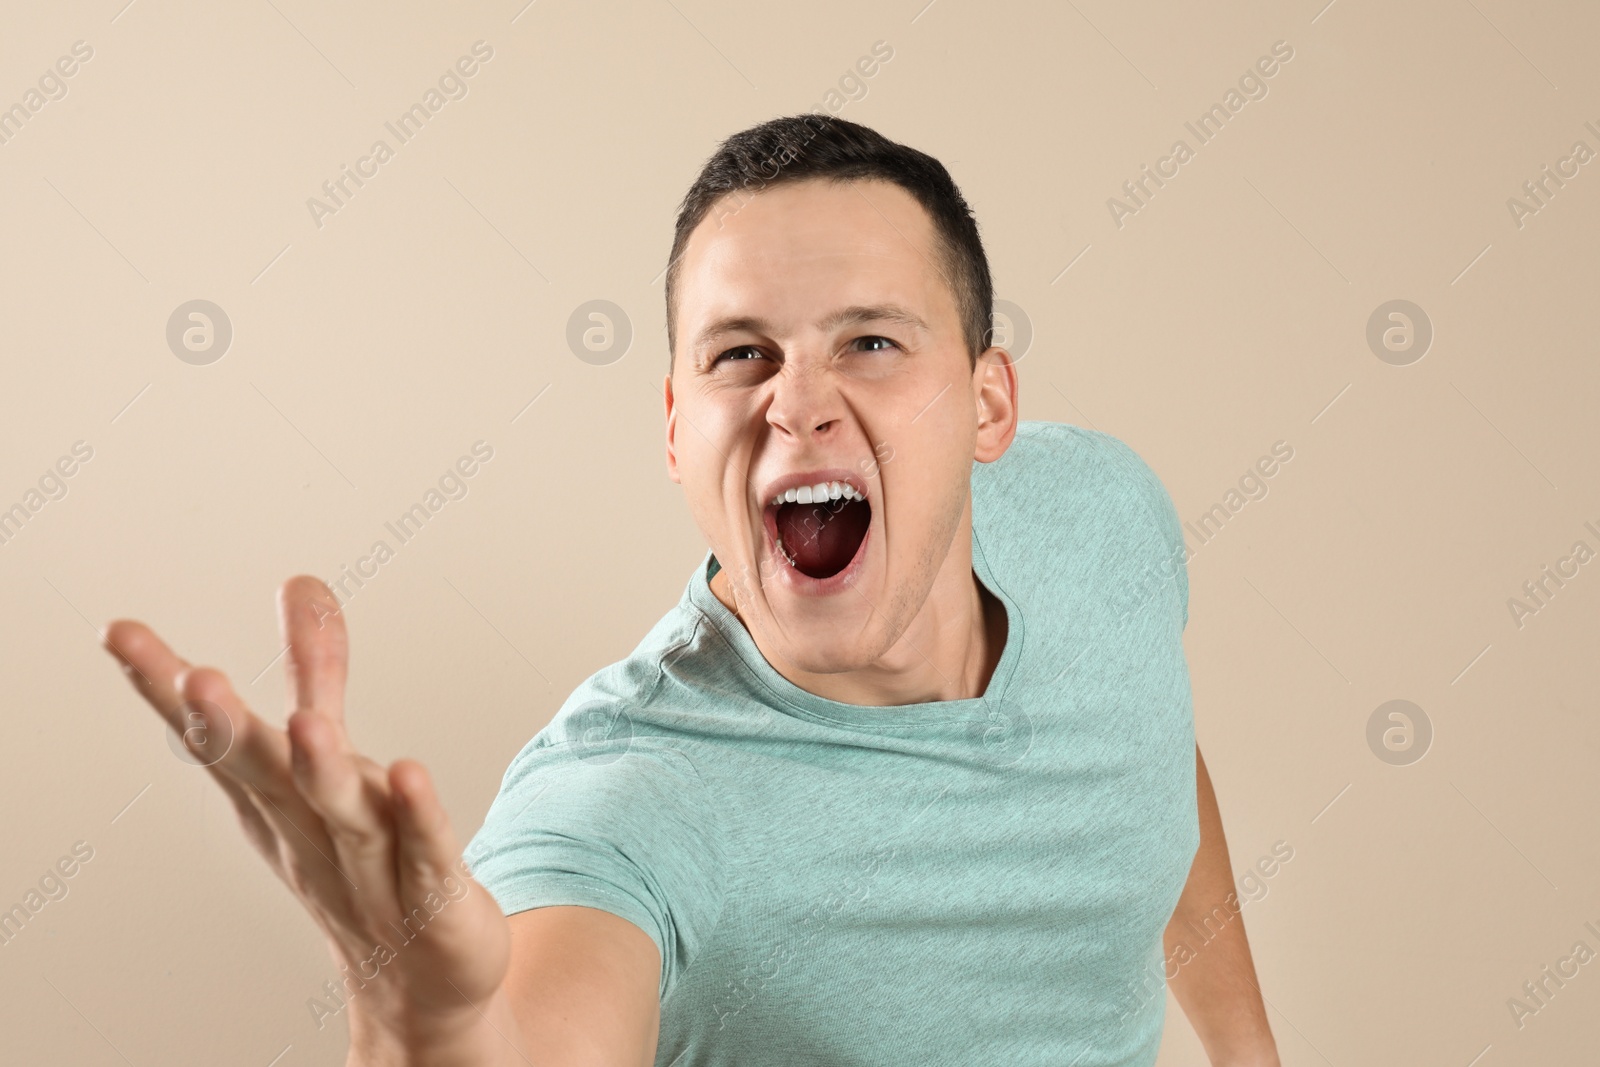 Photo of Handsome young man shouting on beige background